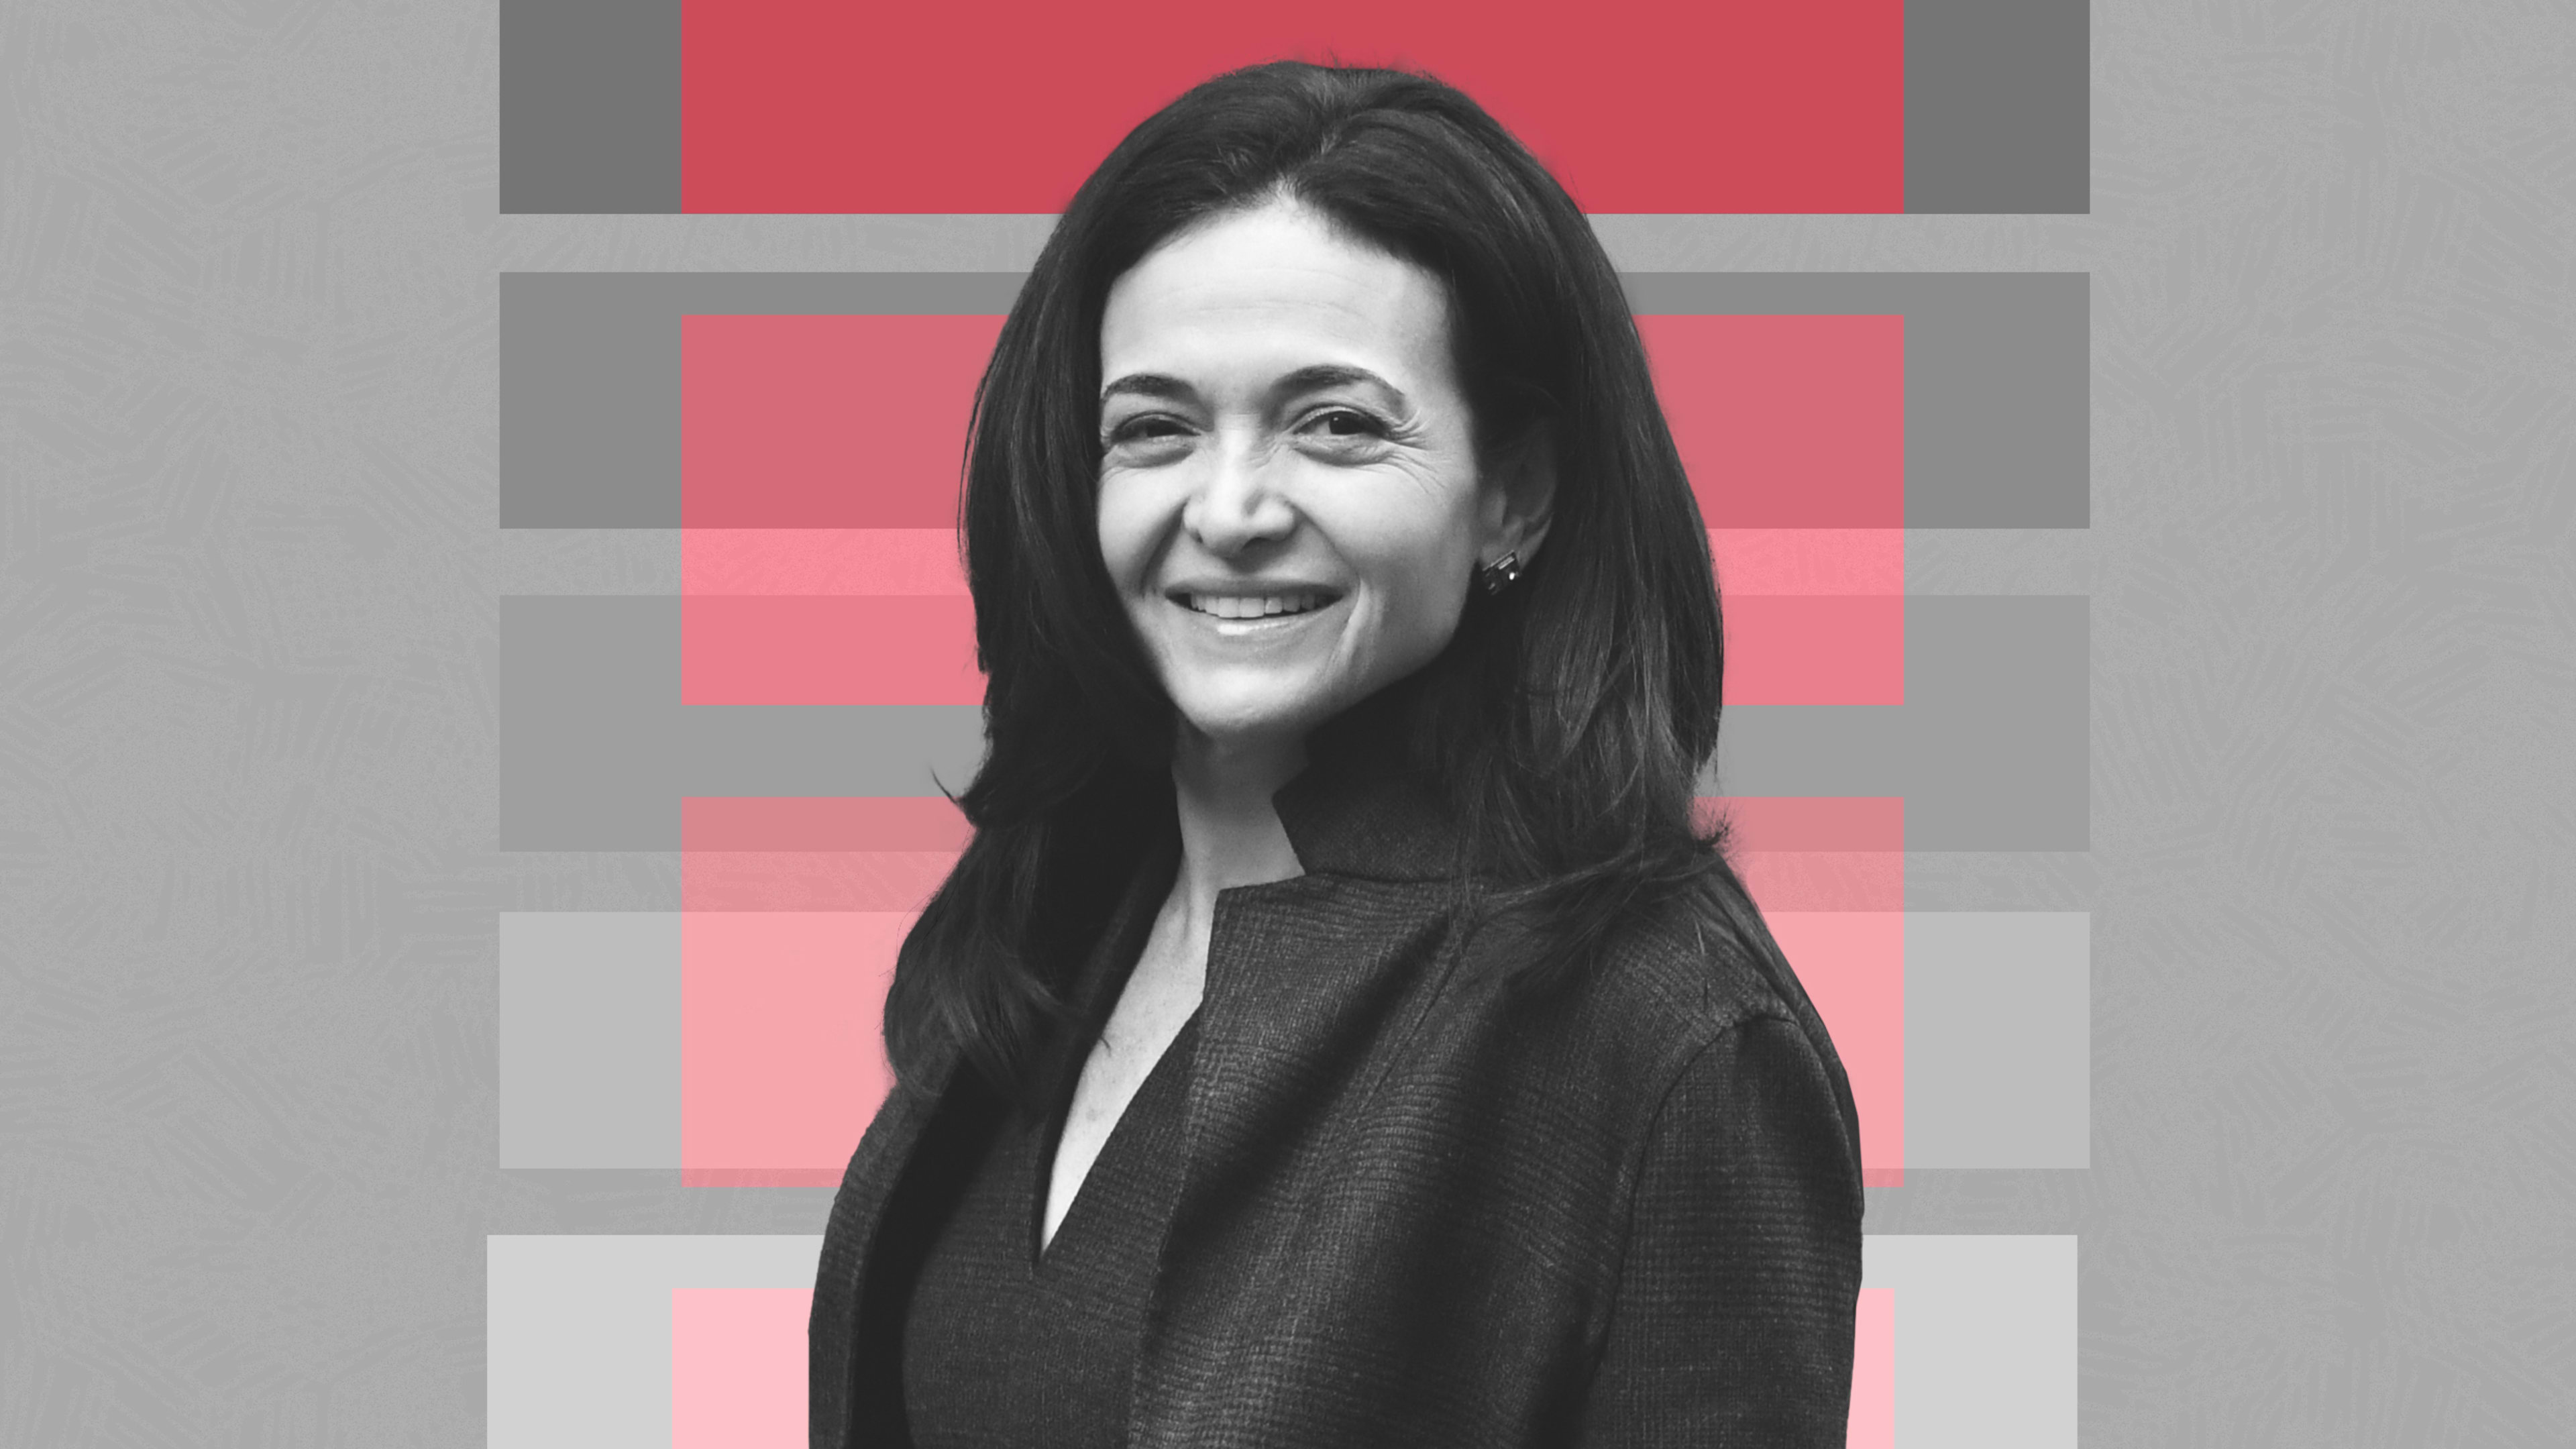 Sheryl Sandberg’s legacy is complicated. Here’s the lesson for leaders